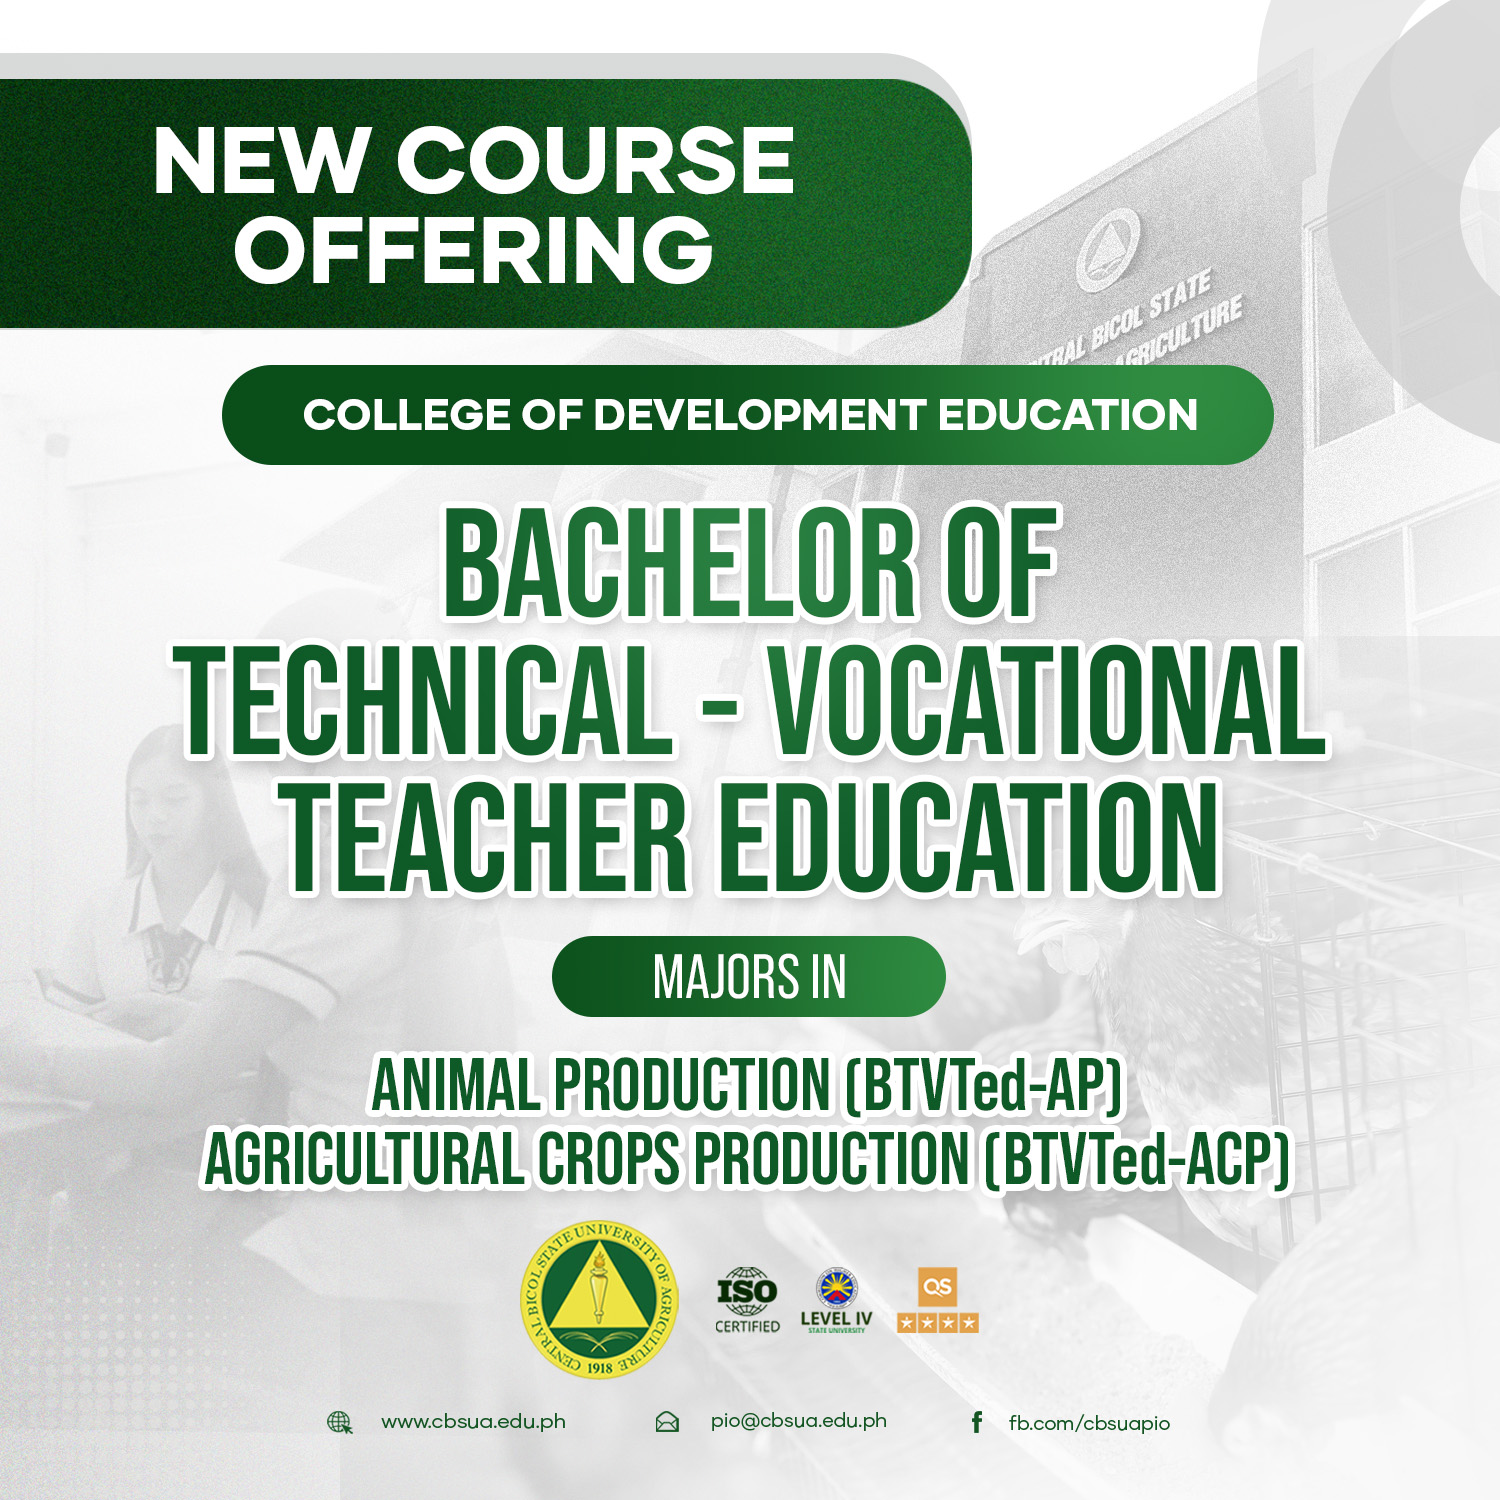 CHED APPROVES CBSUA CDE TO OFFER BTVTED MAJORS IN AGRICULTURAL CROPS PRODUCTION, ANIMAL PRODUCTION